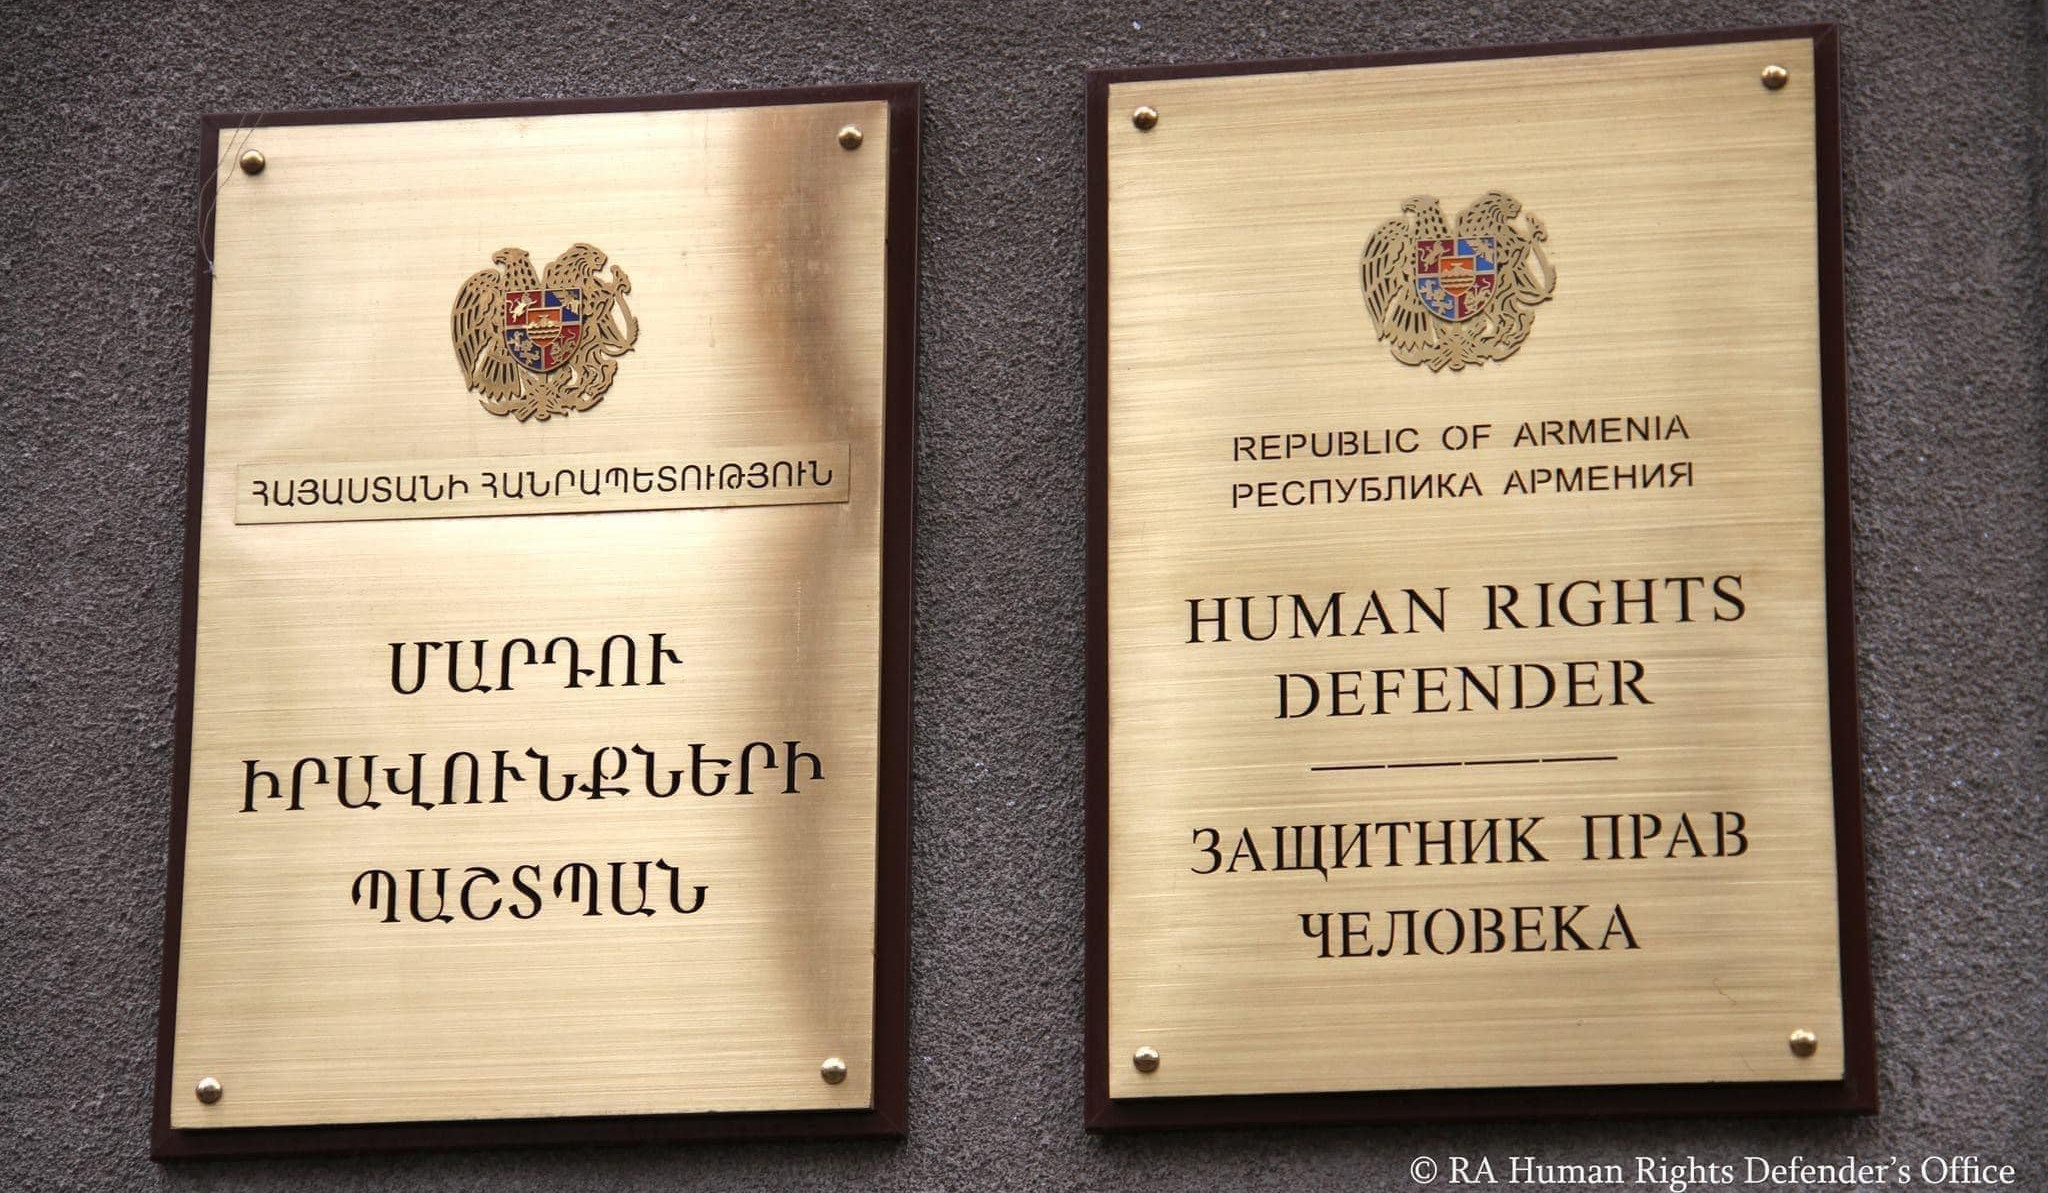 Statement of Human Rights Defender on Conviction of Two Armenian Servicemen Captured by Azerbaijani Armed Forces in sovereign territory of Armenia